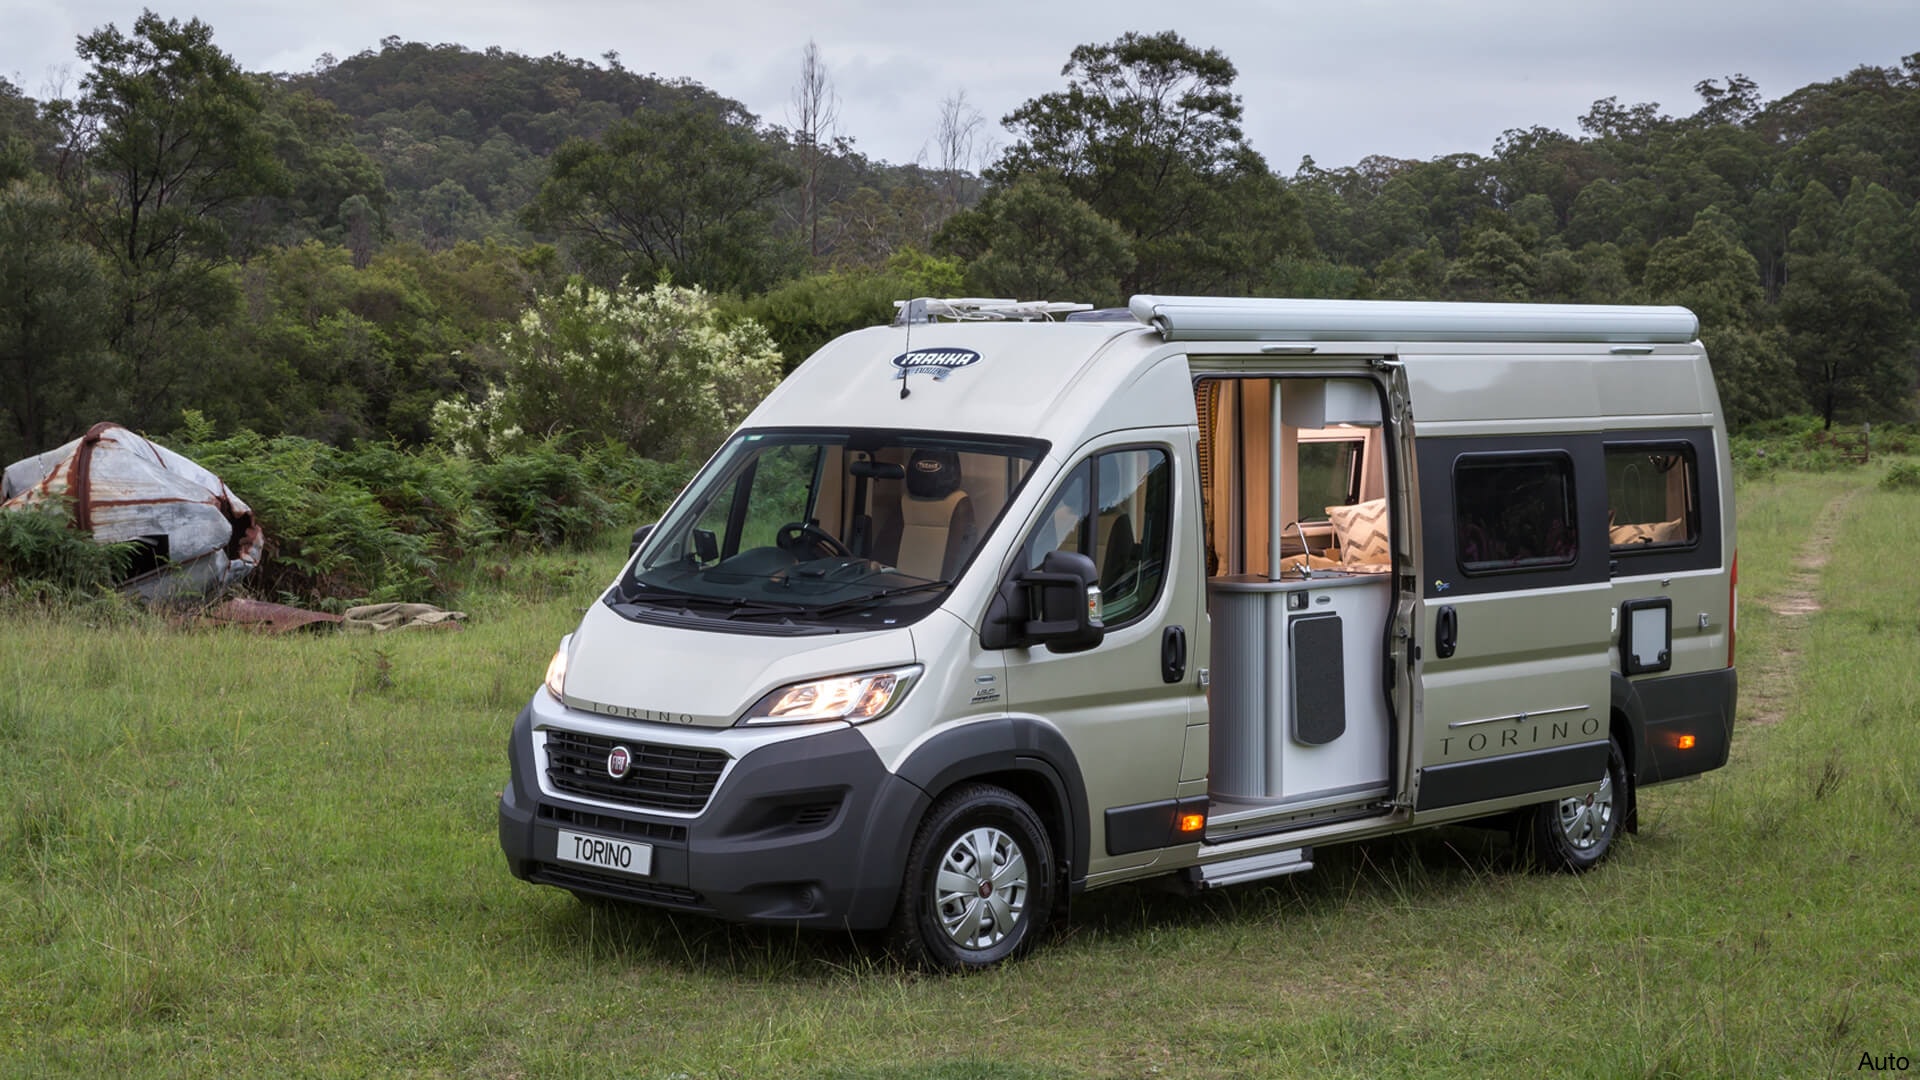 Best Fiat Ducato Camper For Sale of all time Check this guide!